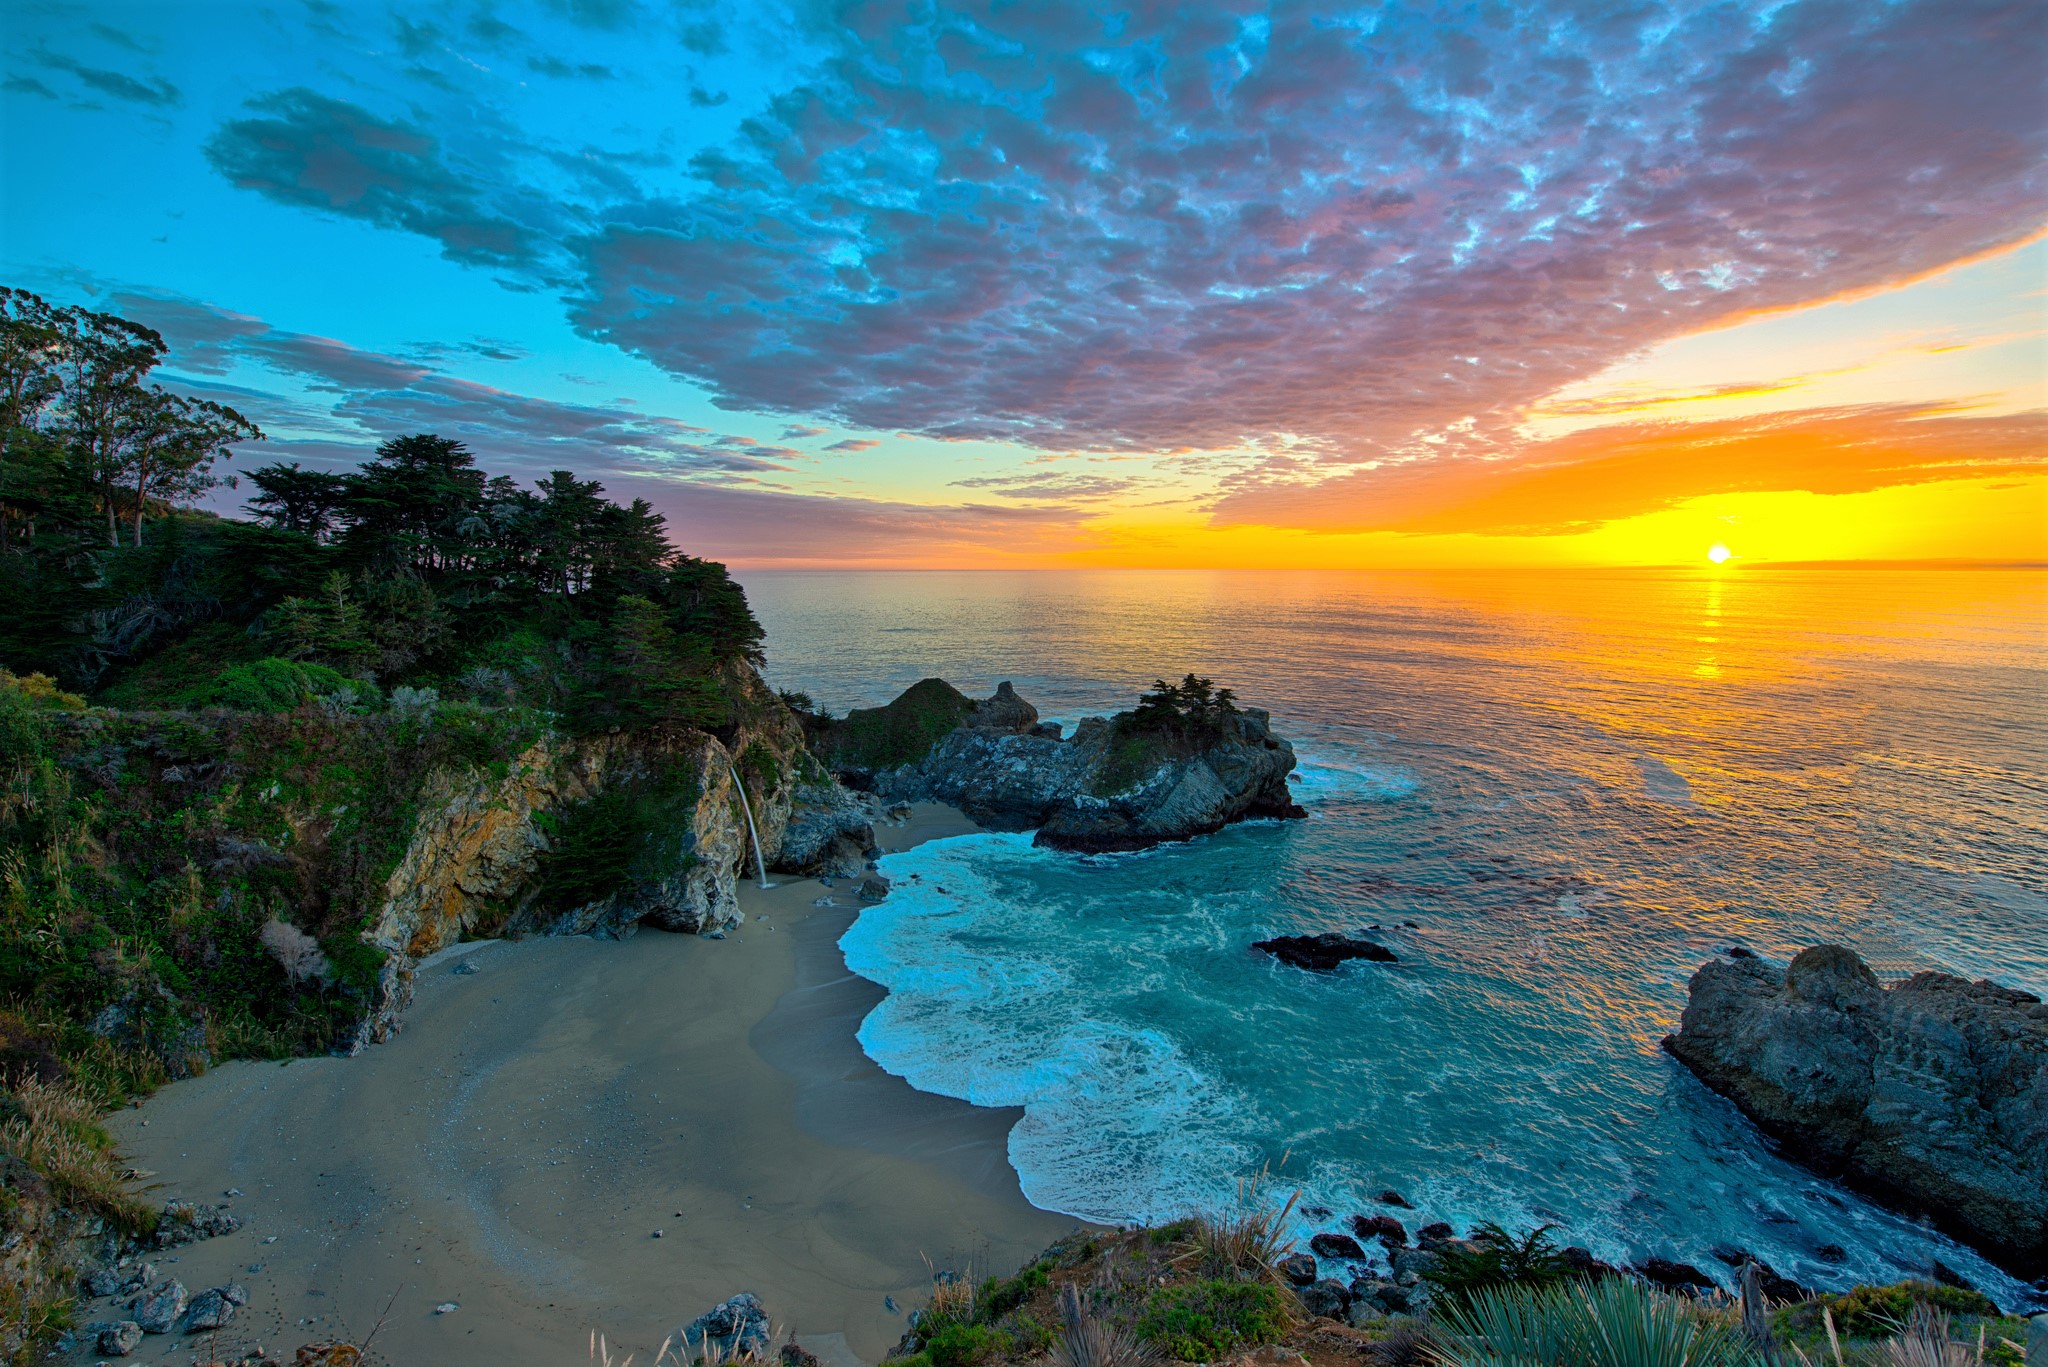 Sunset over McWay Falls in California by Bob Nastasi